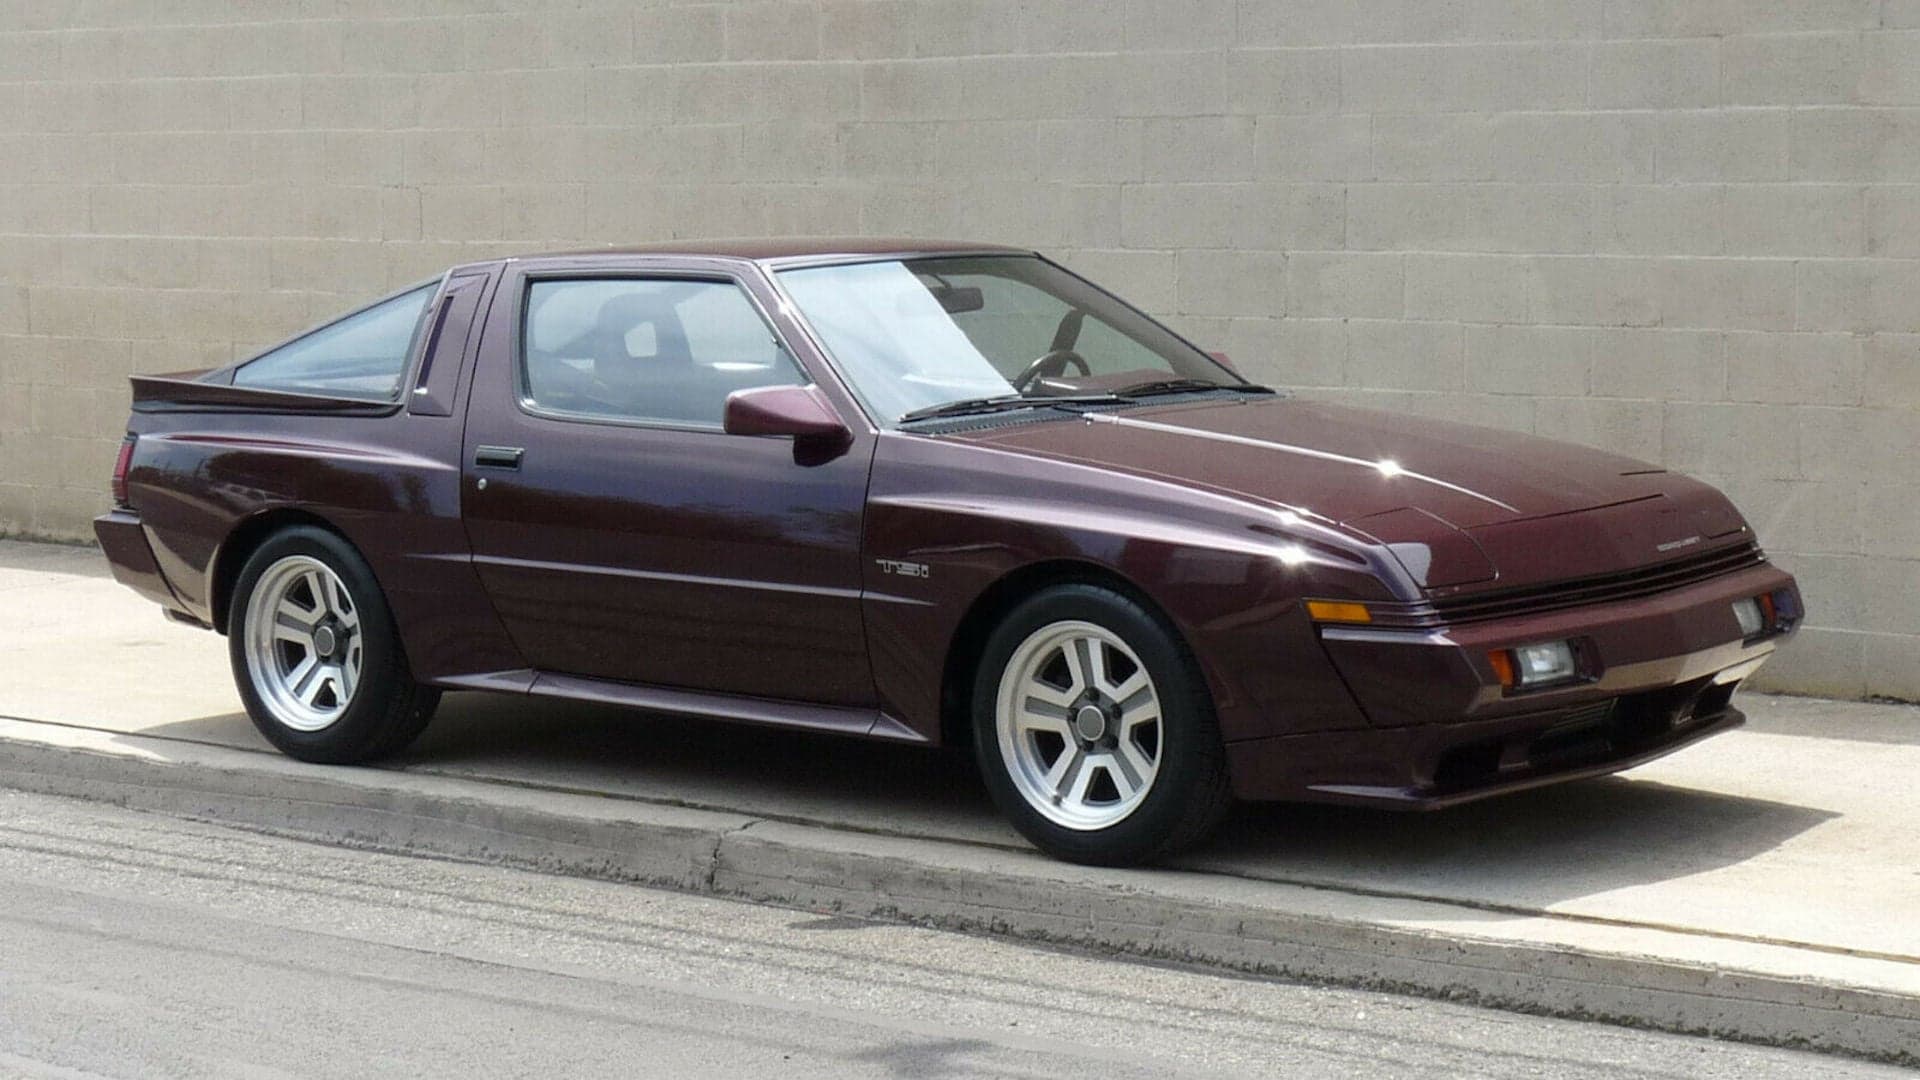 This Might Be the Cleanest 1988 Chrysler Conquest TSI Left